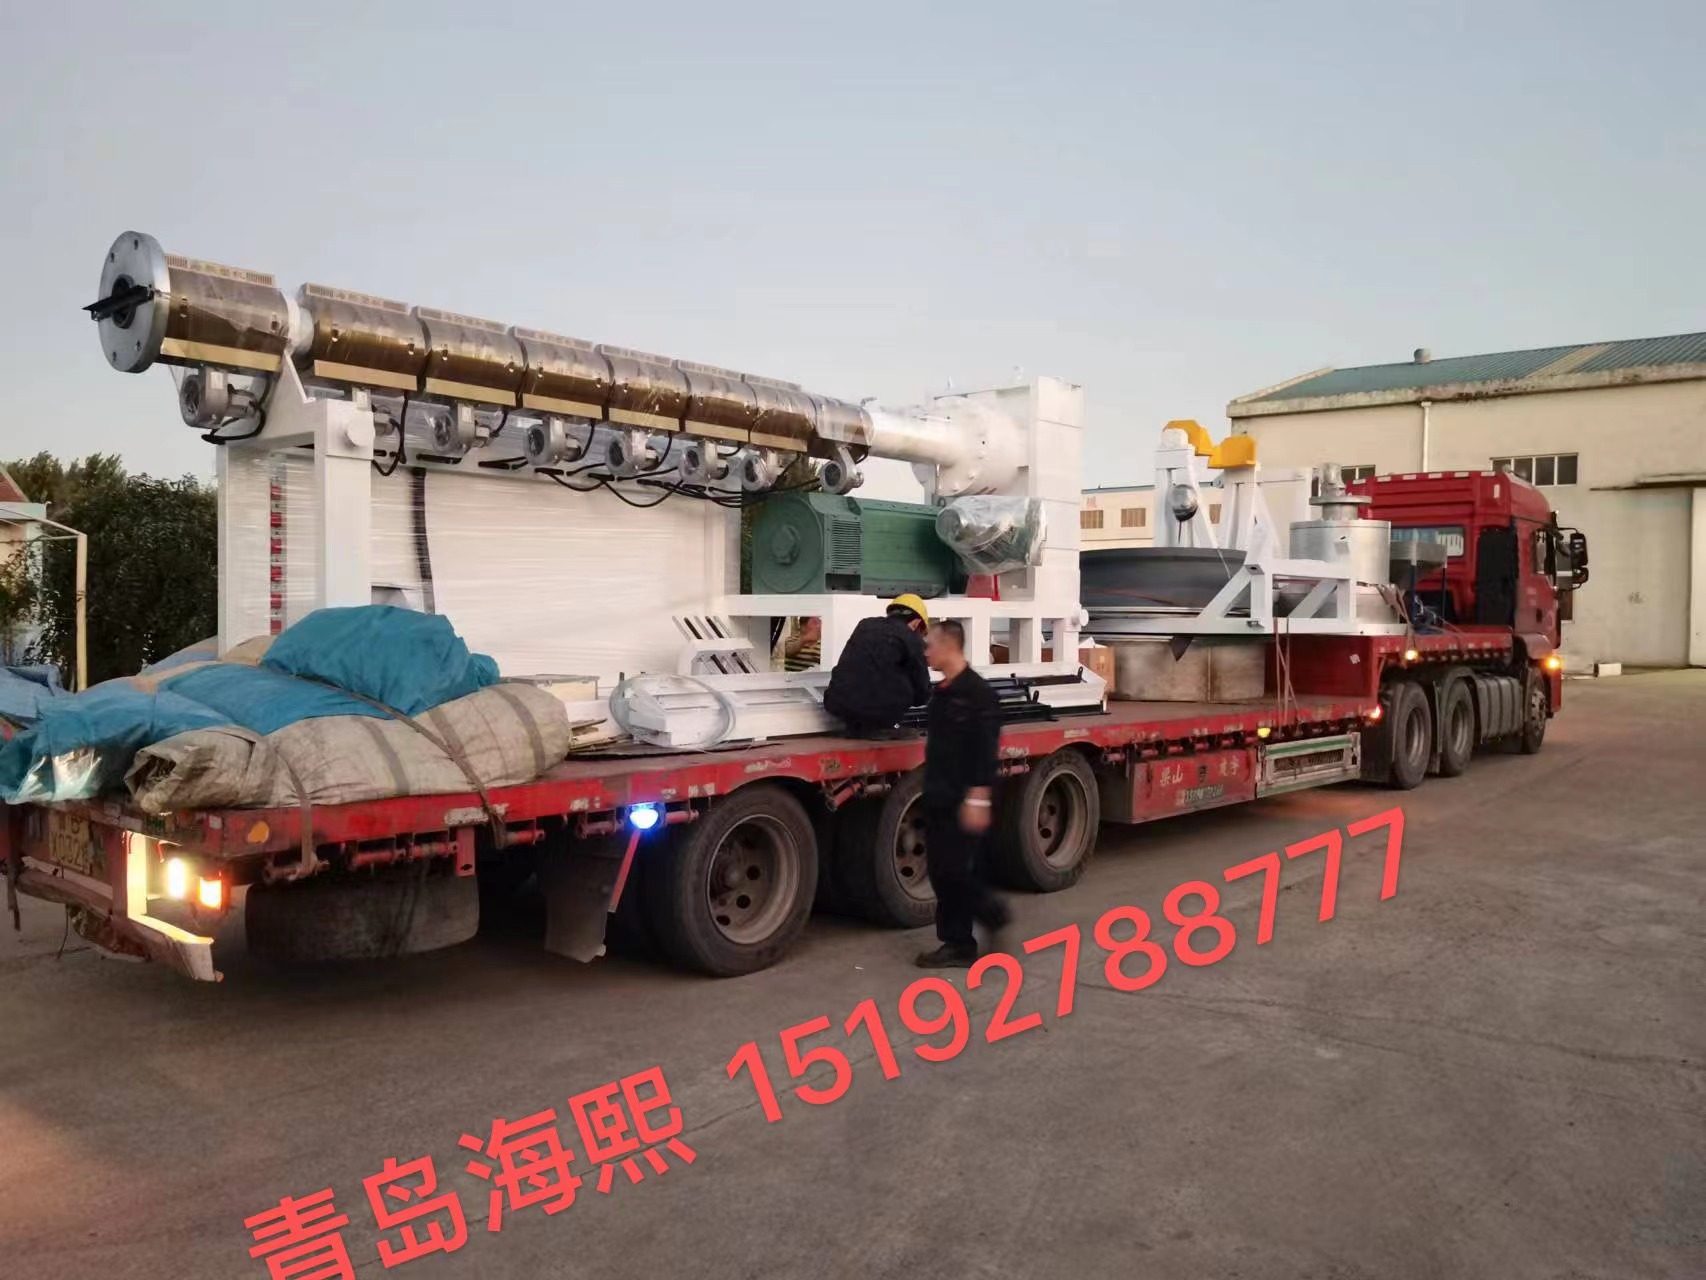 The second car of Hebei Shengcang Pipeline Anti-corrosion Engineering Co., LTD